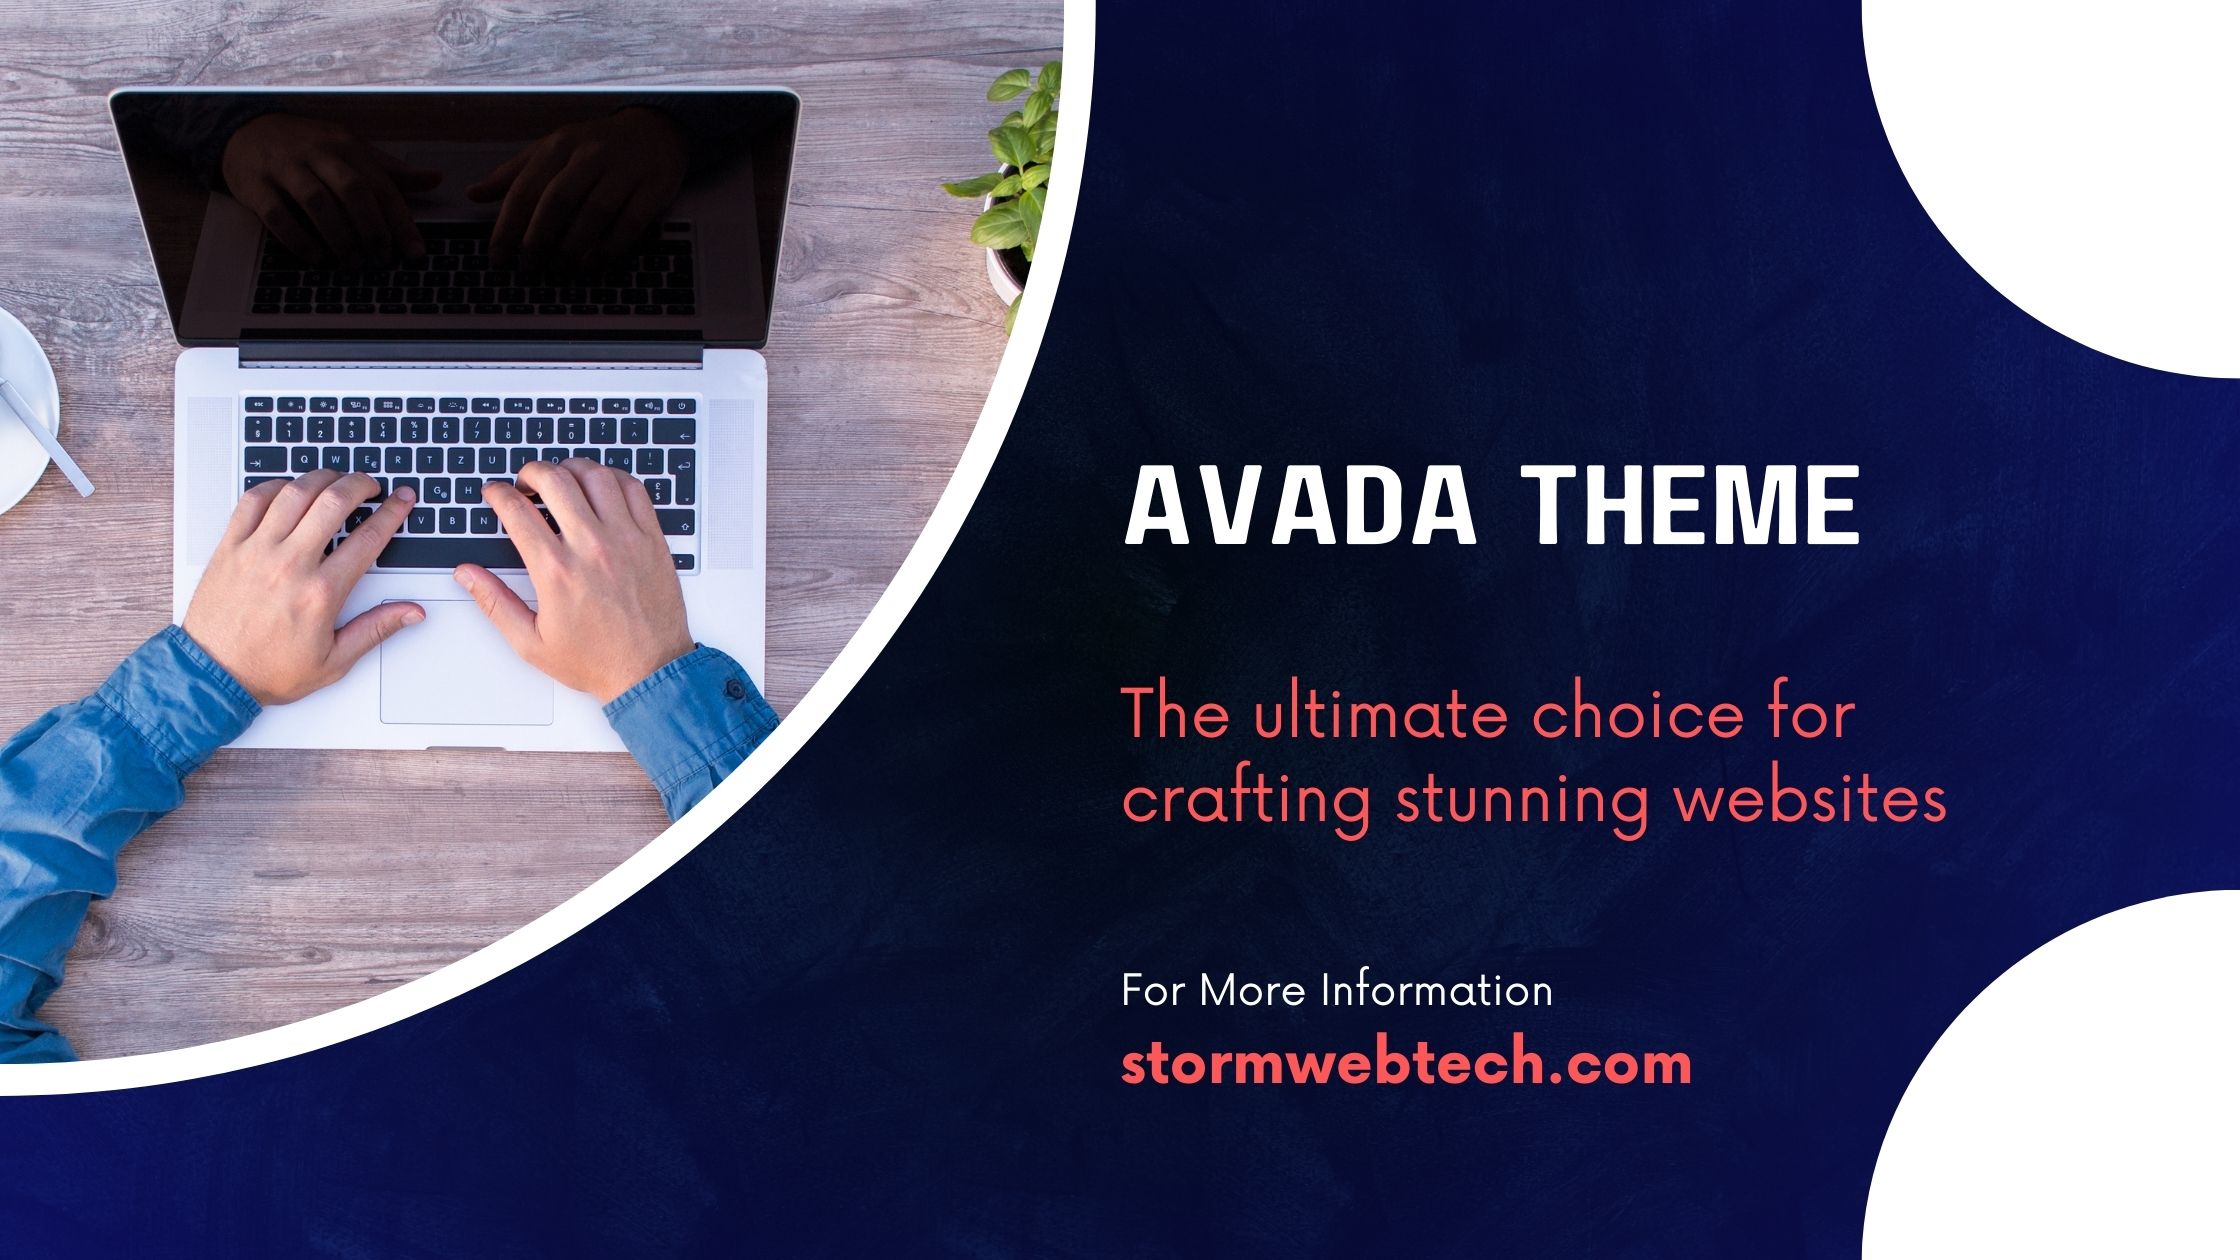 Avada Theme, its powerful features, stunning design options, and flexibility, Avada Theme has captured the hearts of countless website creators